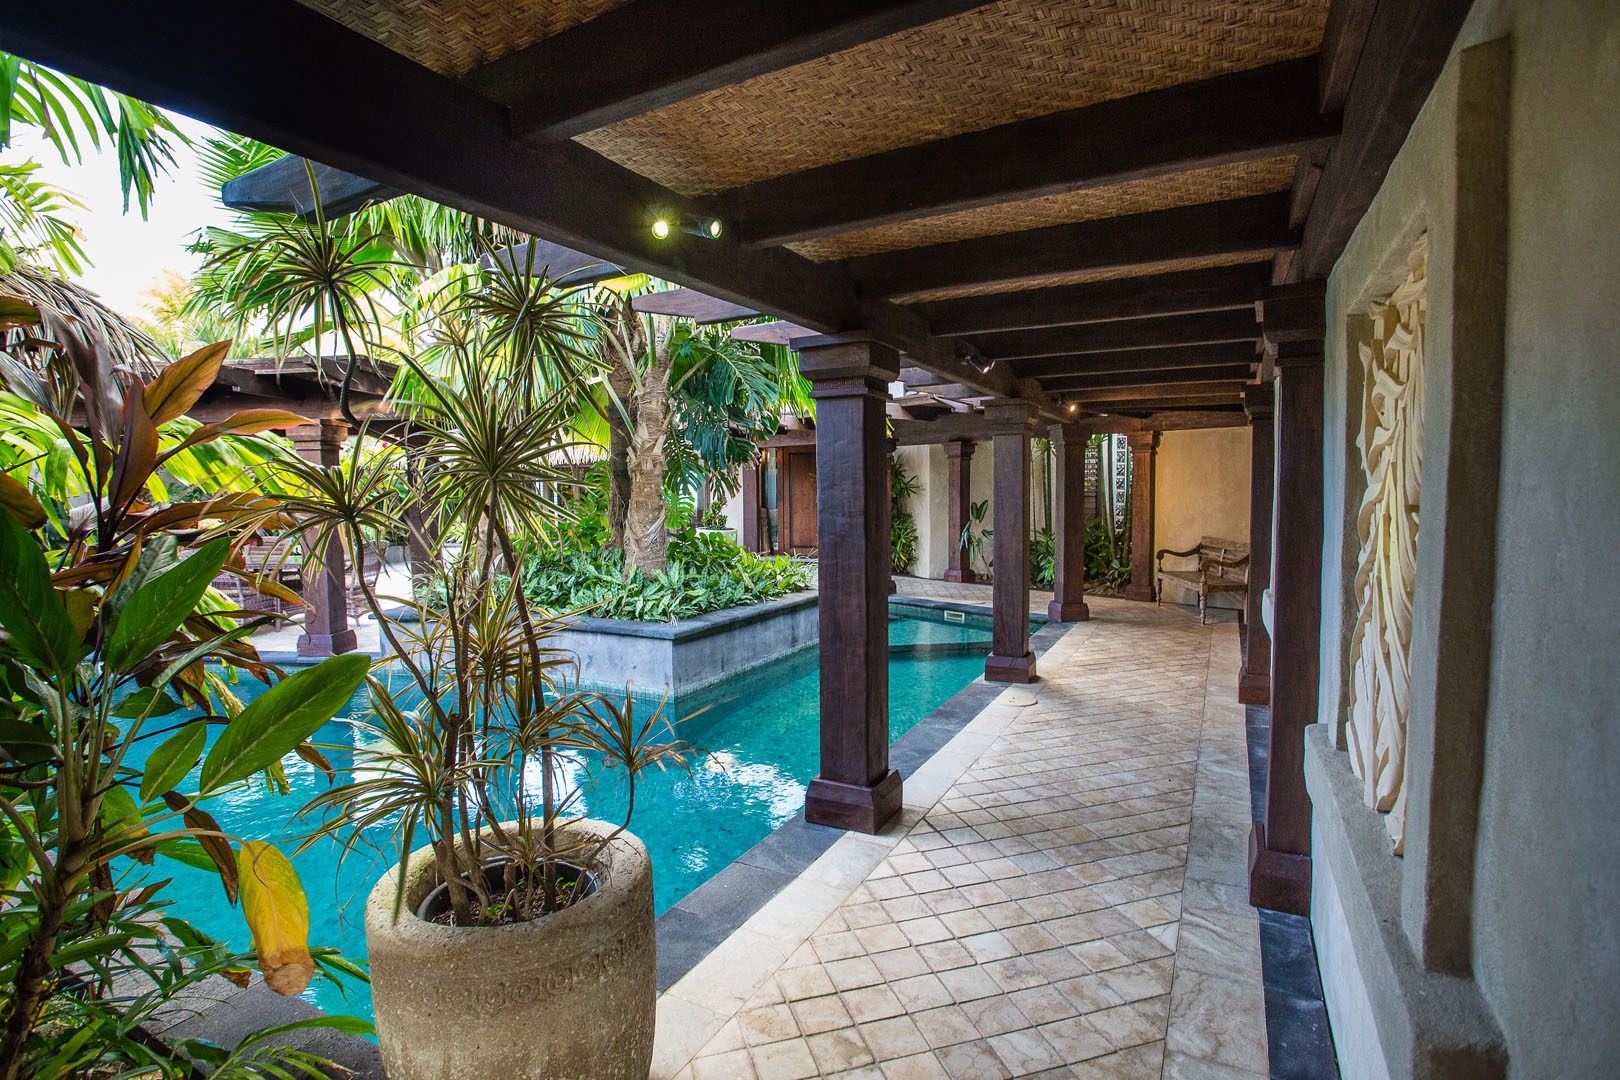 View of the modern Presidential Beachfront Villa Pool surrounded by lush tropical gardens